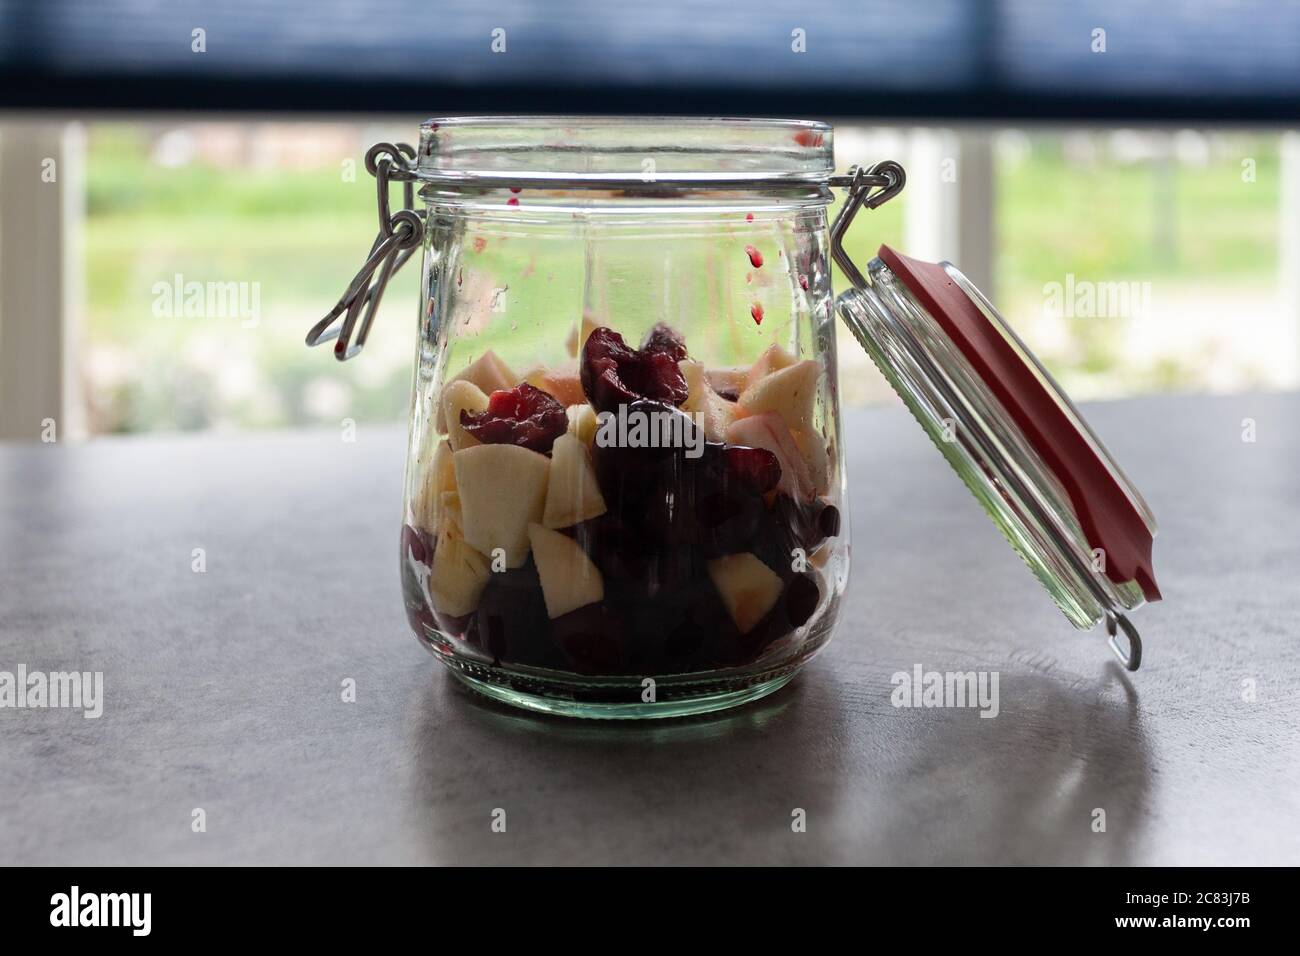 Closeup shot of a glass bank with cut fruits on a grey table Stock Photo